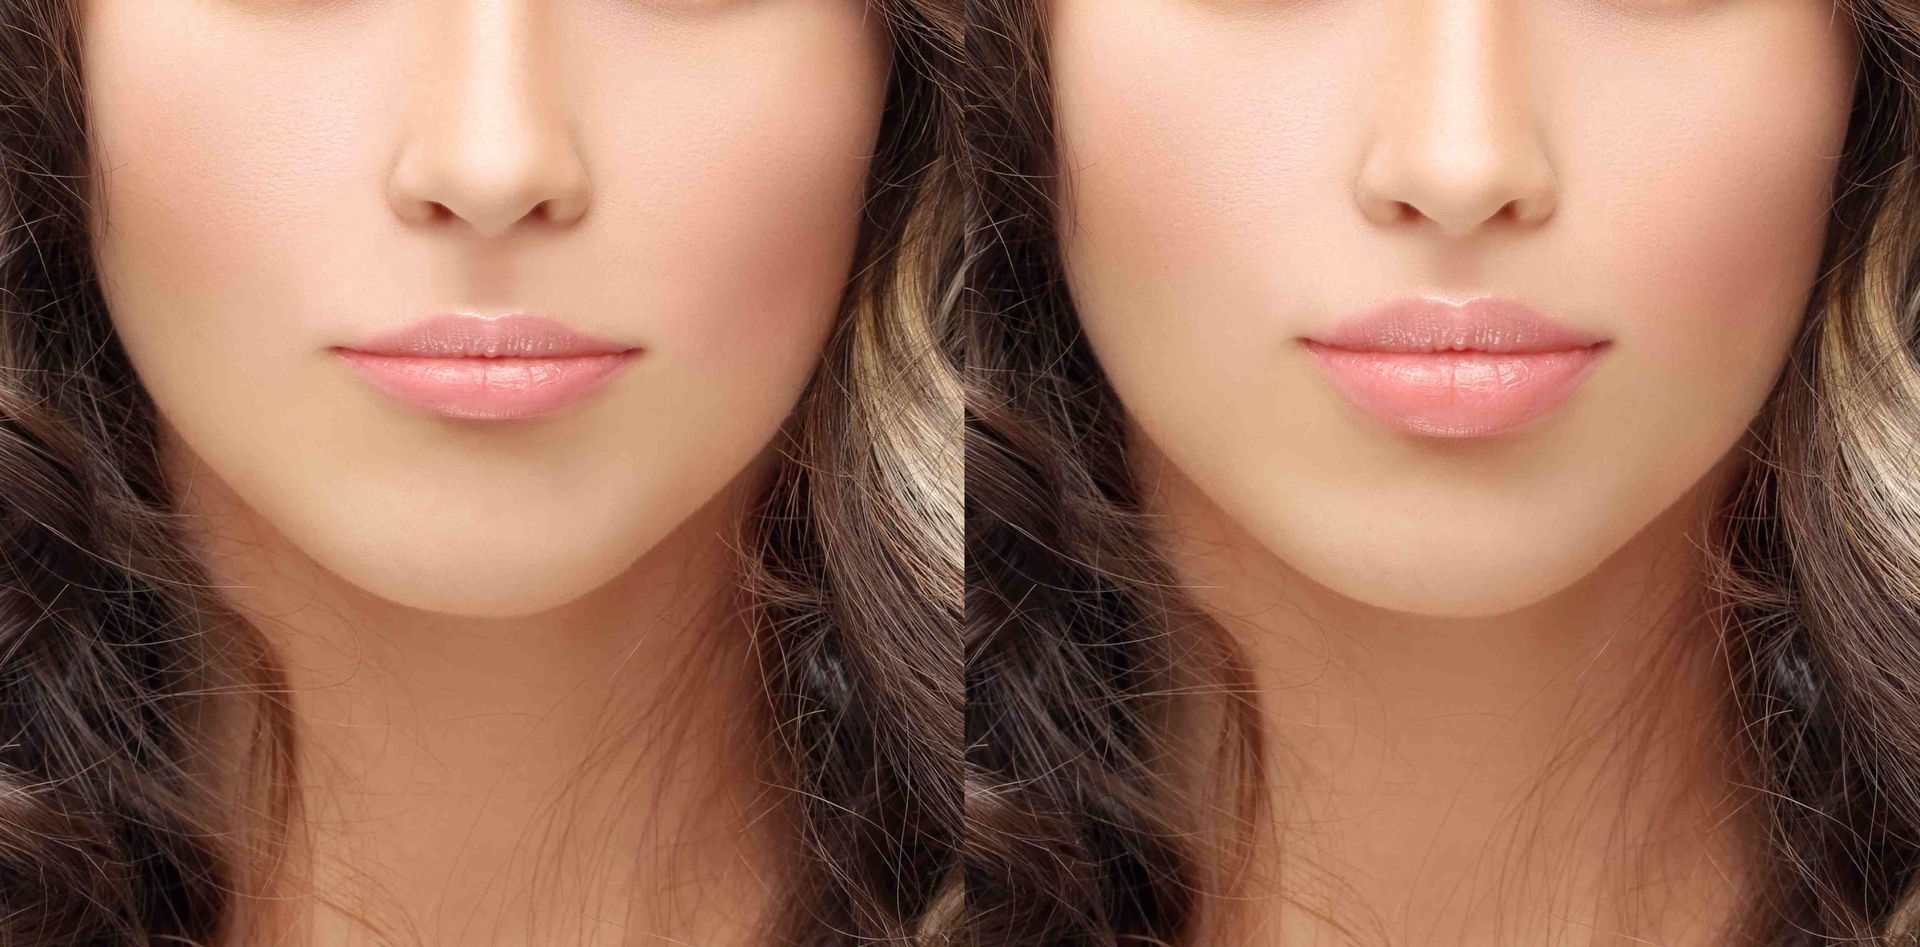 Professional commercial photograph of a woman's nose, lips, and cheeks